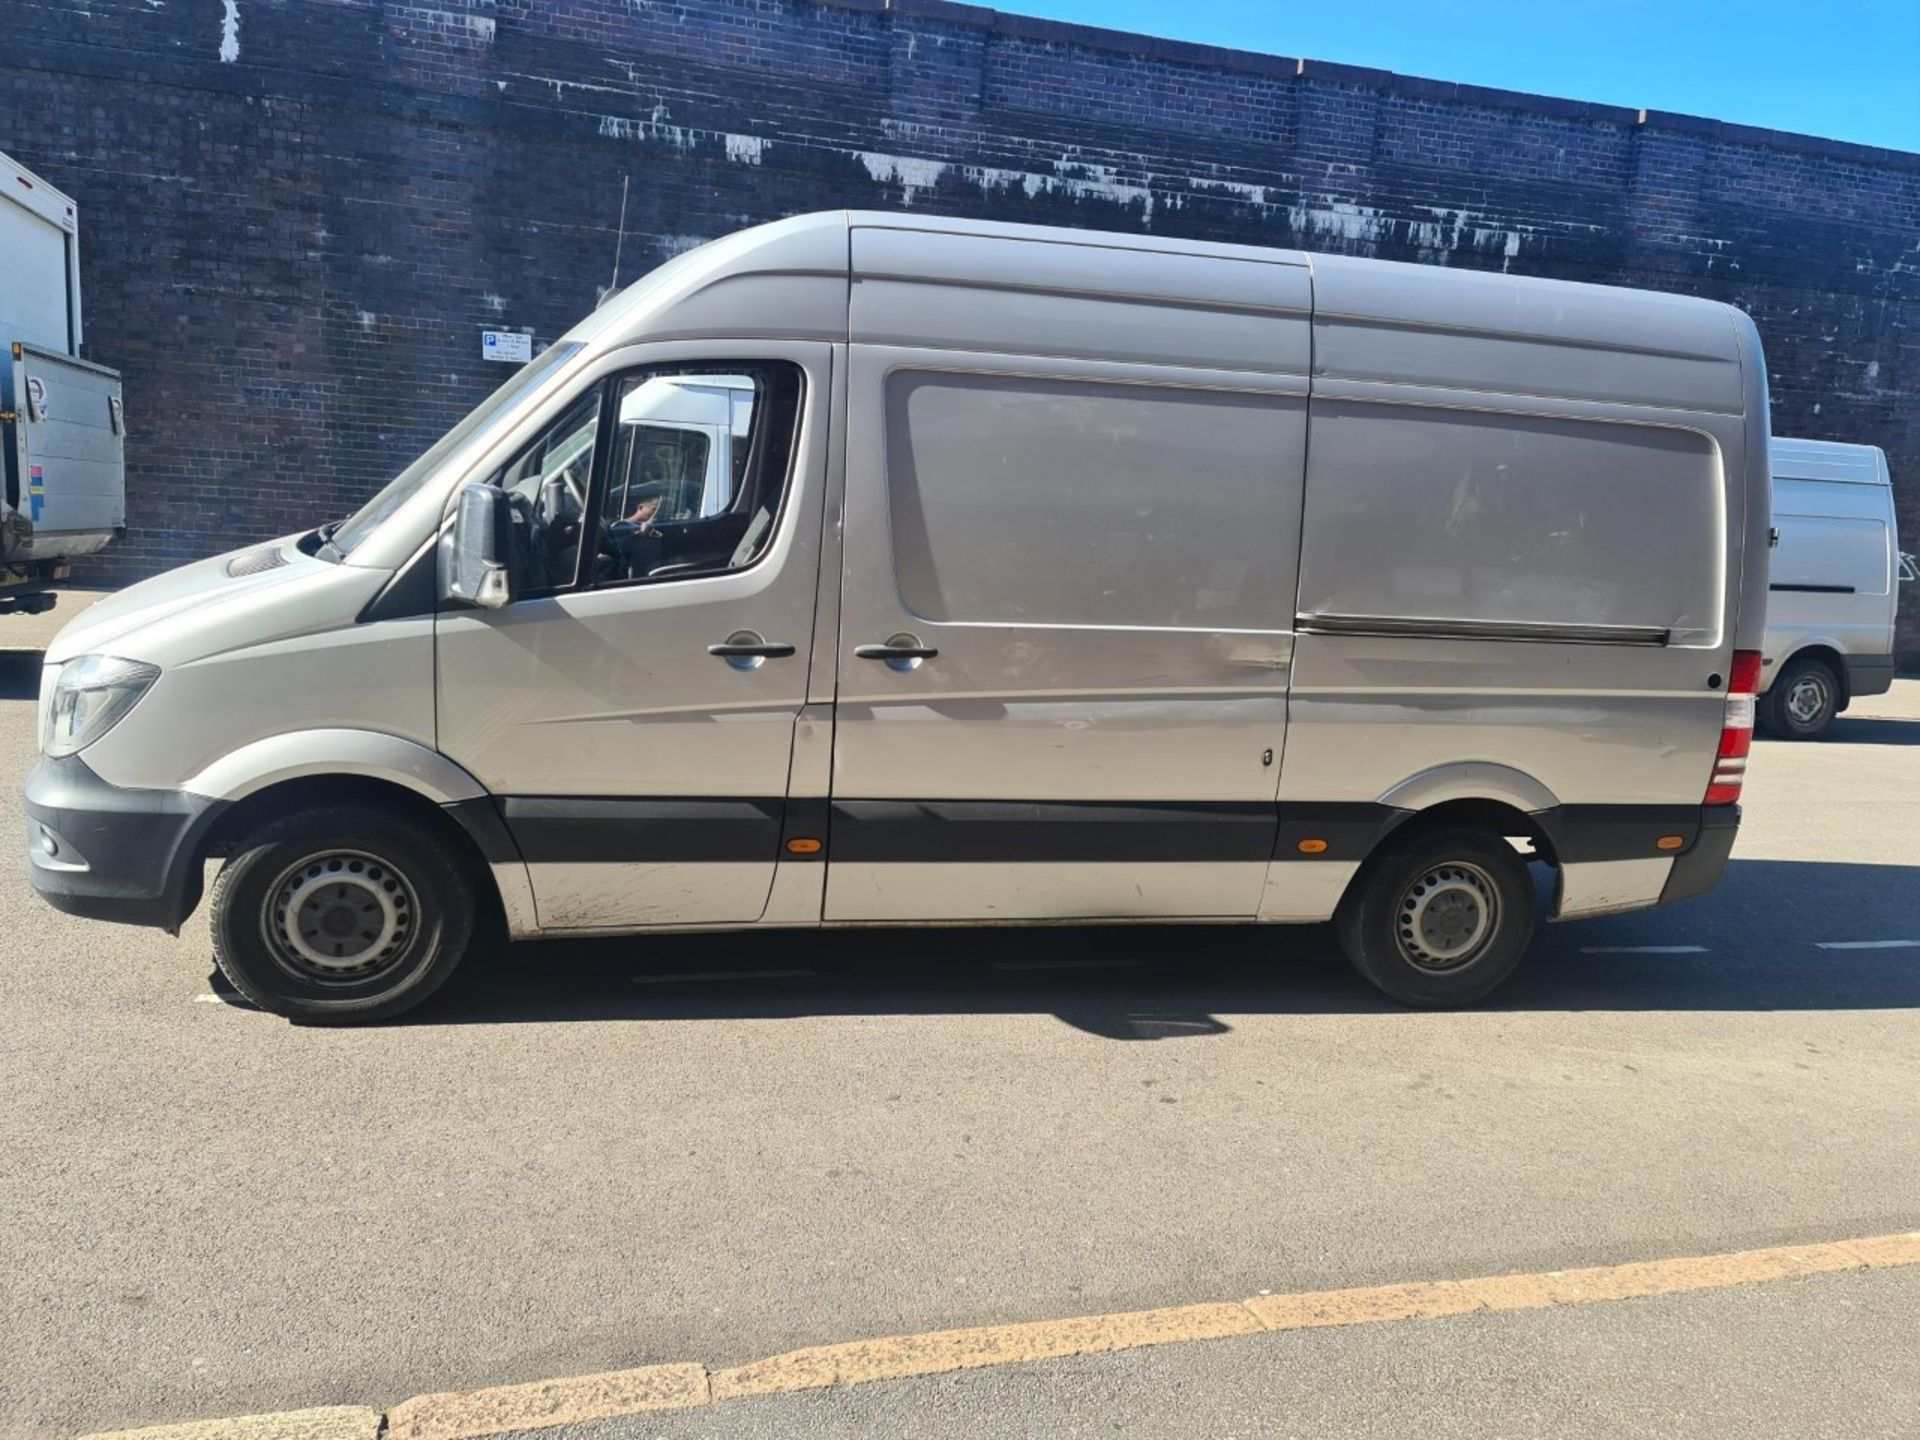 LM14NGX - 2014 MERCEDES BENZ SPRINTER 313CDI. SILVER. 109,583 MILES. MOT valid until 25 January - Image 7 of 9